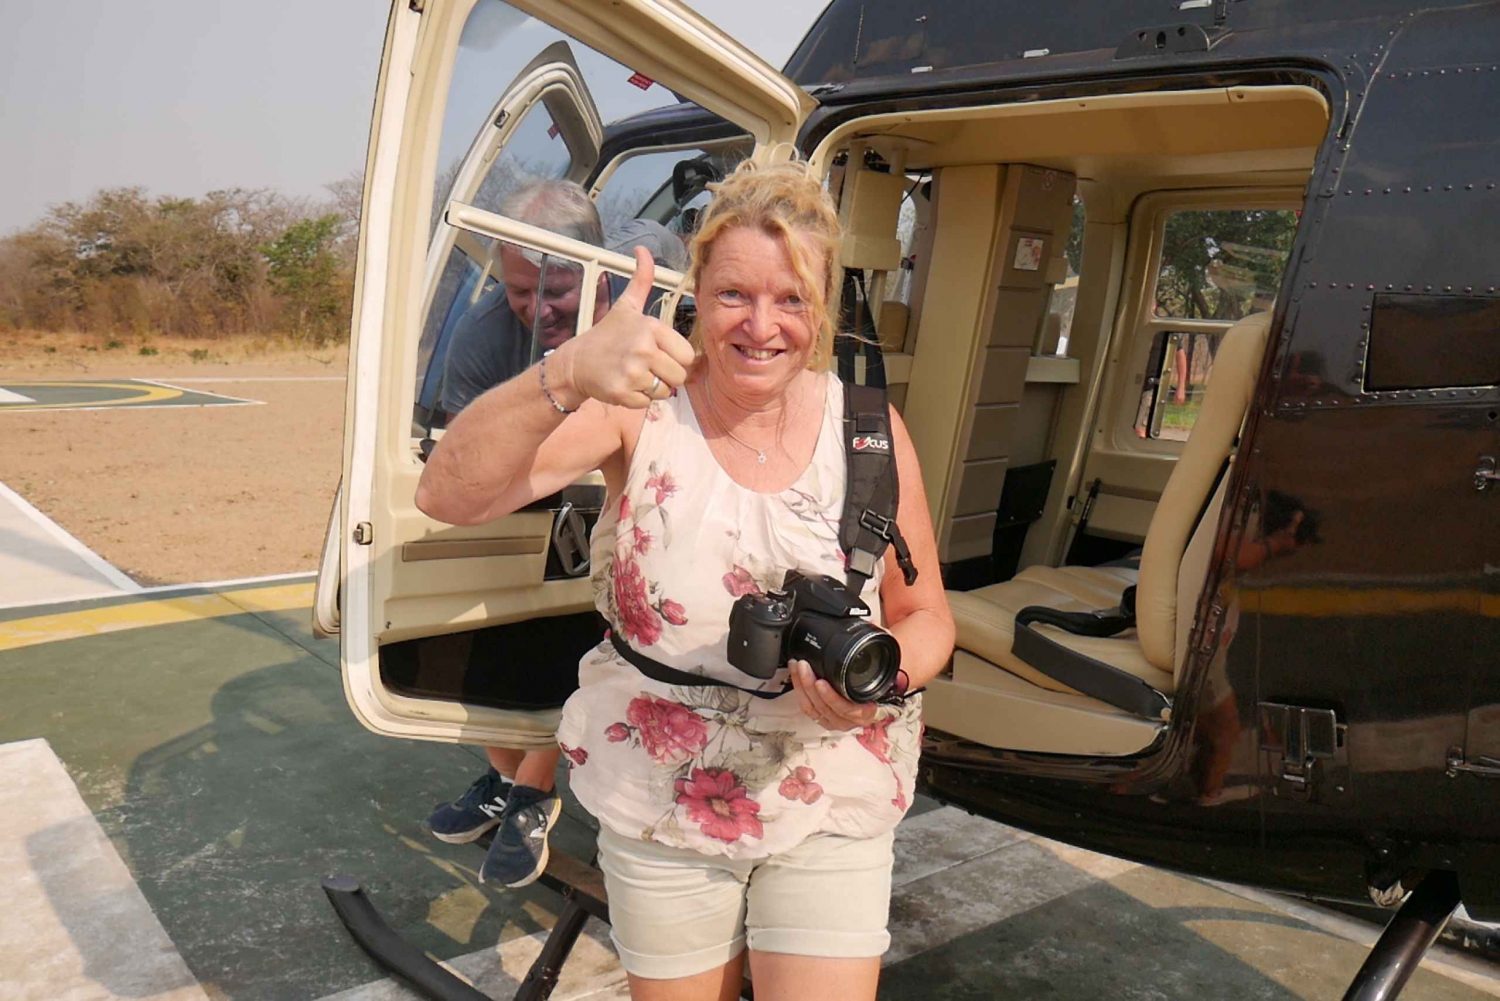 Victoria Falls: Helicopter Tour